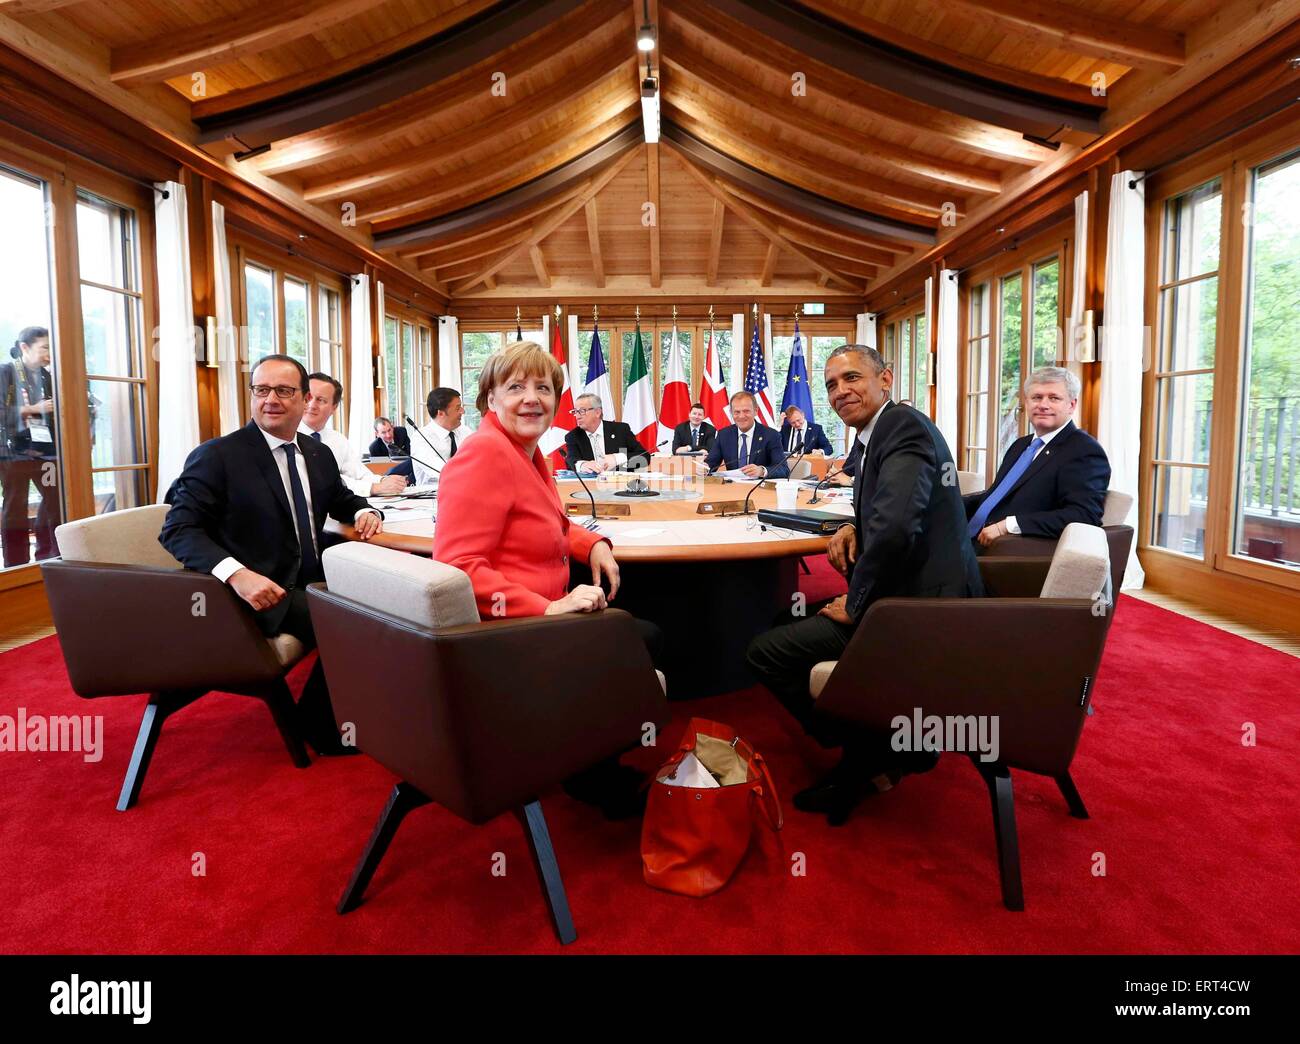 Elmau Castle, Germany. 8th June, 2015. Garmisch-Partenkirchen, Germany. 08th June, 2015. (Clockwise from L) French President Francois Hollande, British Prime Minister David Cameron, Italy's Prime Minister Matteo Renzi, European Commission President Jean-Claude Juncker, European Council President Donald Tusk, Japanese Prime Minister Shinzo Abe (obscured) Canada's Prime Minister Stephen Harper, US President Barack Obama and Germany's Chancellor Angela Merkel, attend working meeting at the G7 summit at Elmau Castle hotel in Elmau near Garmisch-Partenkirchen, Germany, 08 June 8 2015. © dpa picture Stock Photo